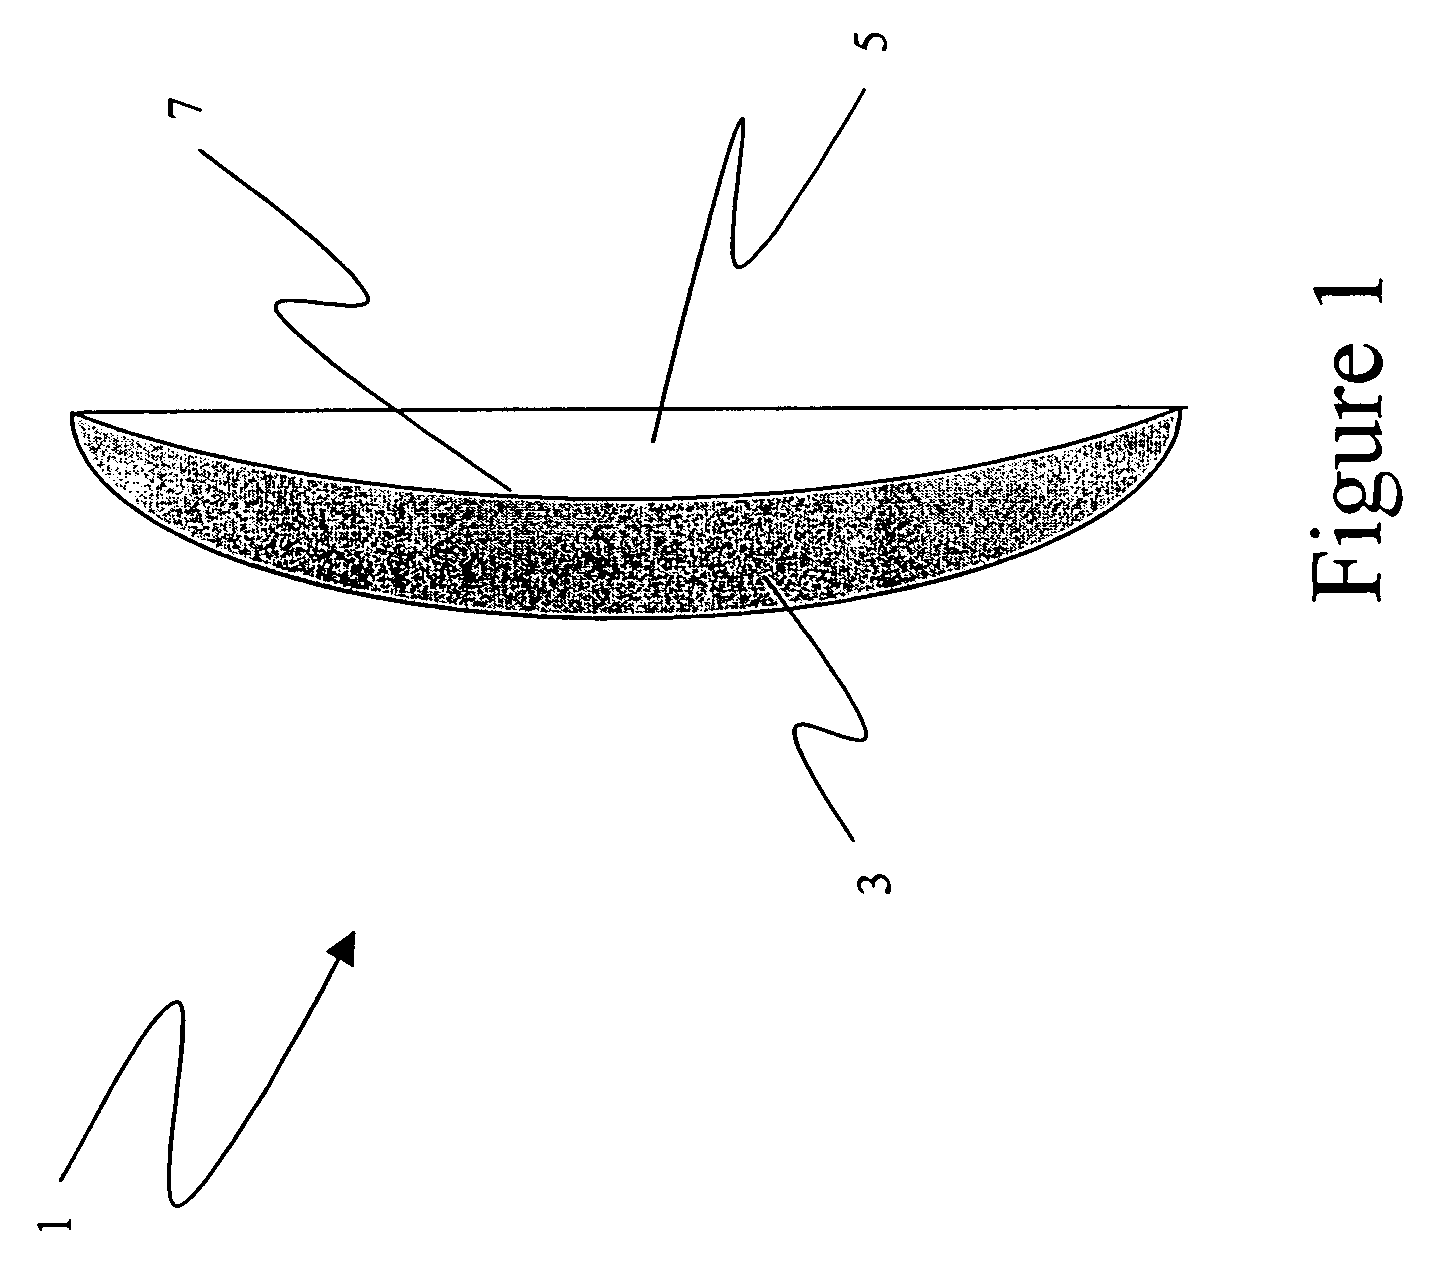 Long curved wedges in an optical film